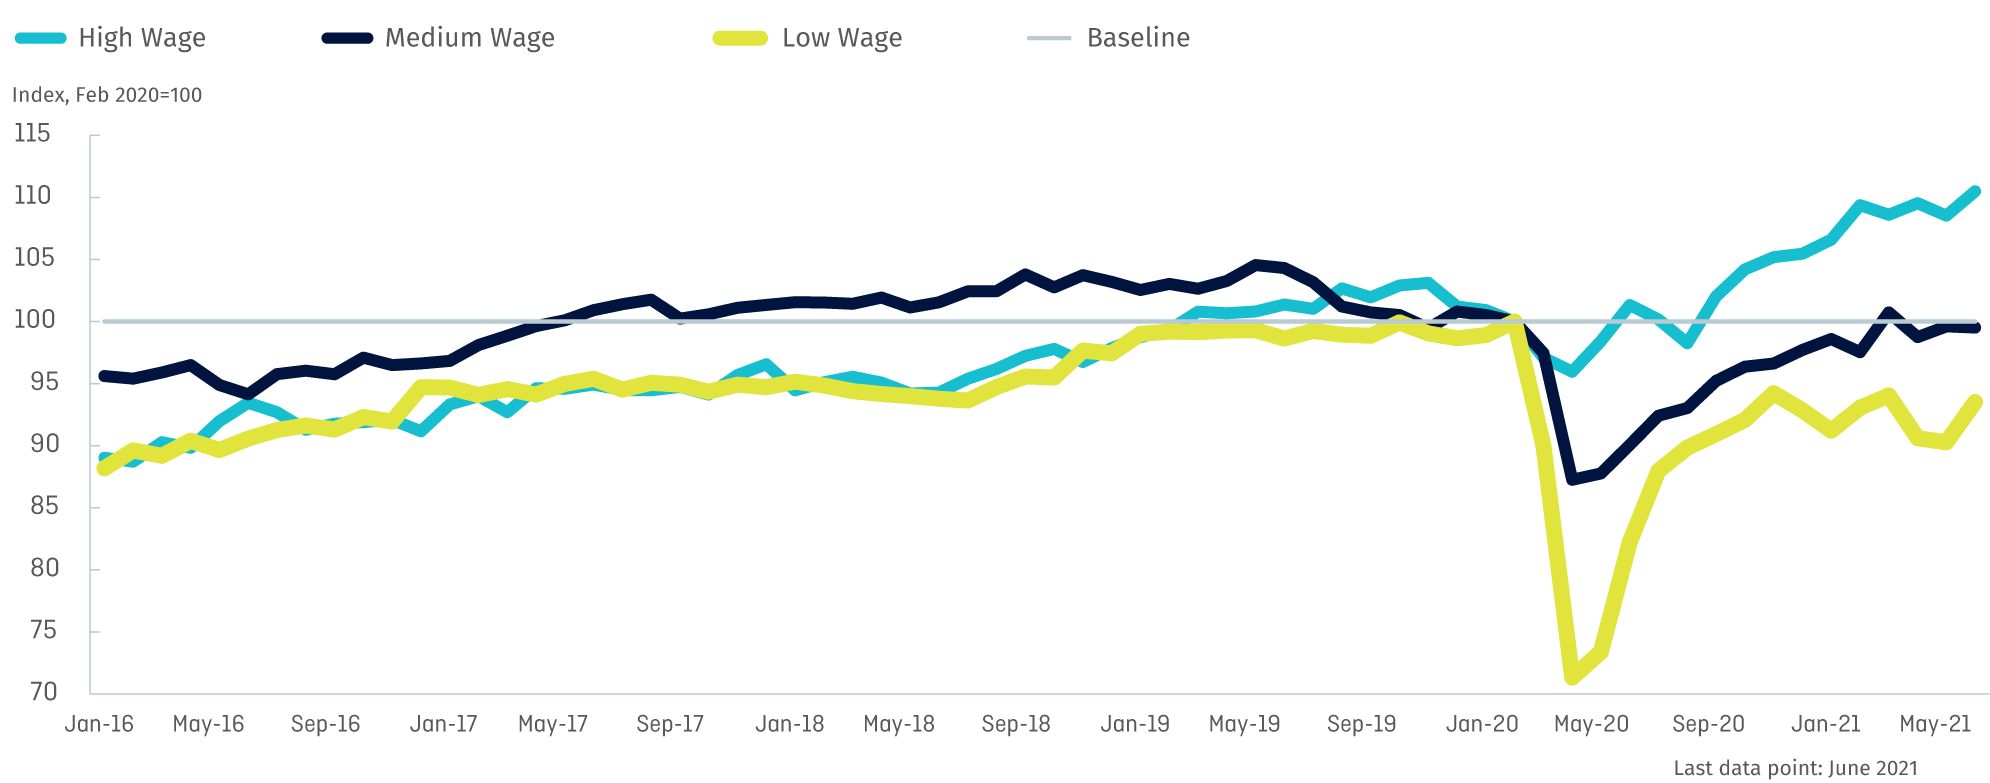 Employment Levels by Wage Tier, British Columbia